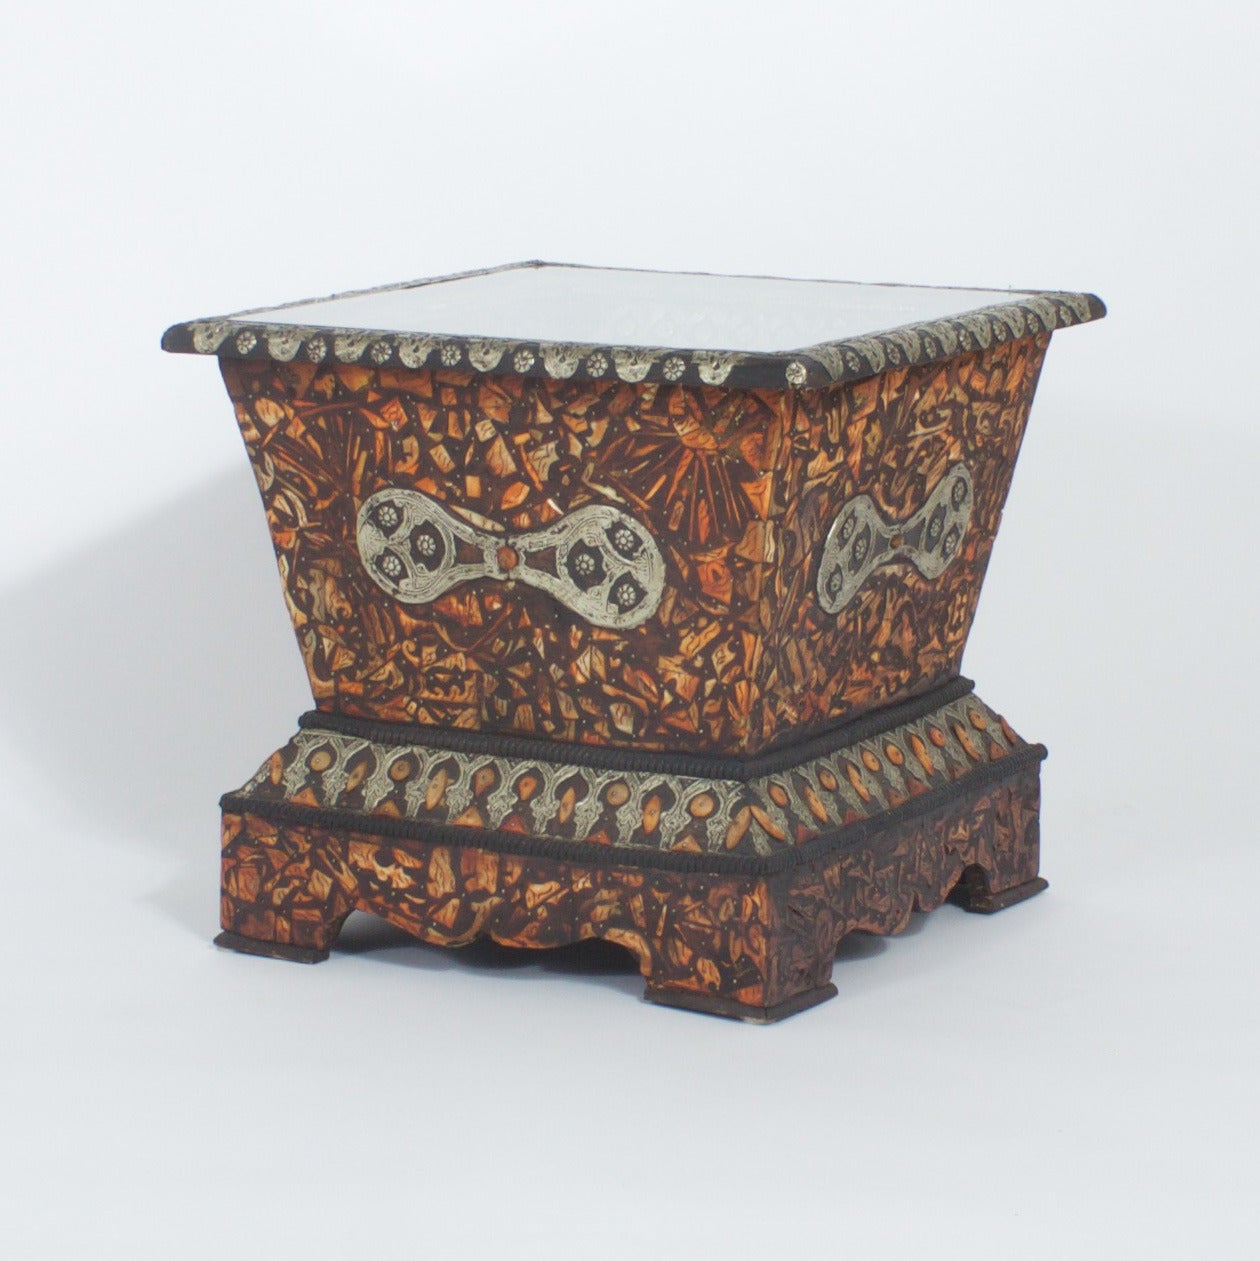 Pair of Midcentury Moroccan end tables with classical form. Decorated in an elaborate mixture of bone and silvered metal. The tops are covered in glass and reveal a large cut out of negative space with the same geometric patterns of Inlaid bone,